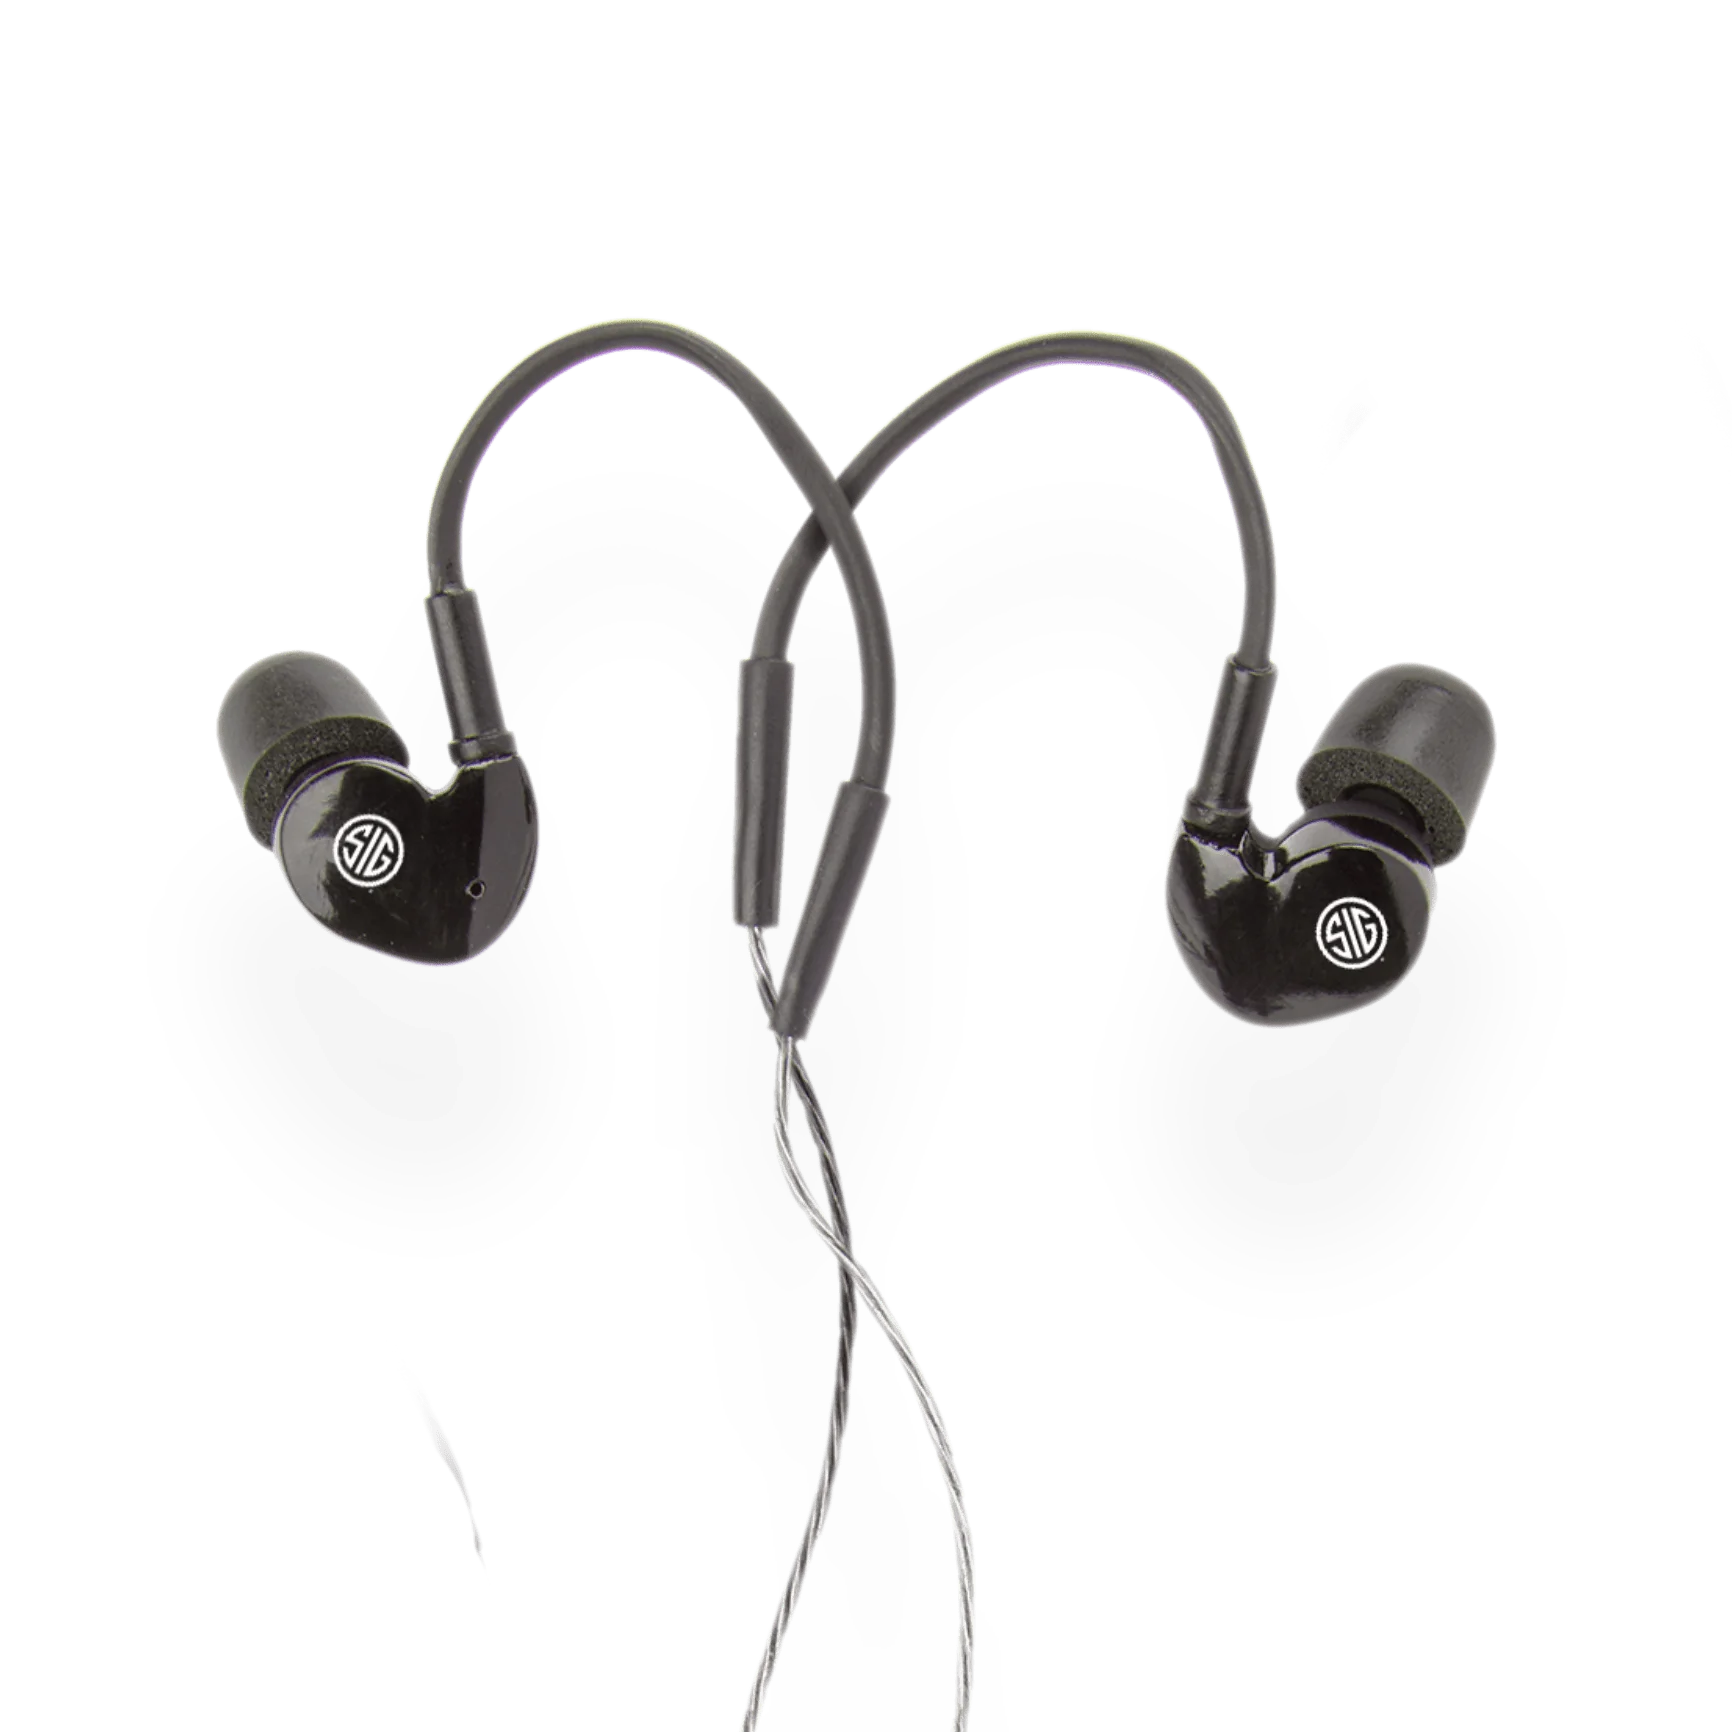 Axil SIG GS Extreme 2.0 Earbuds - Newest Arrivals